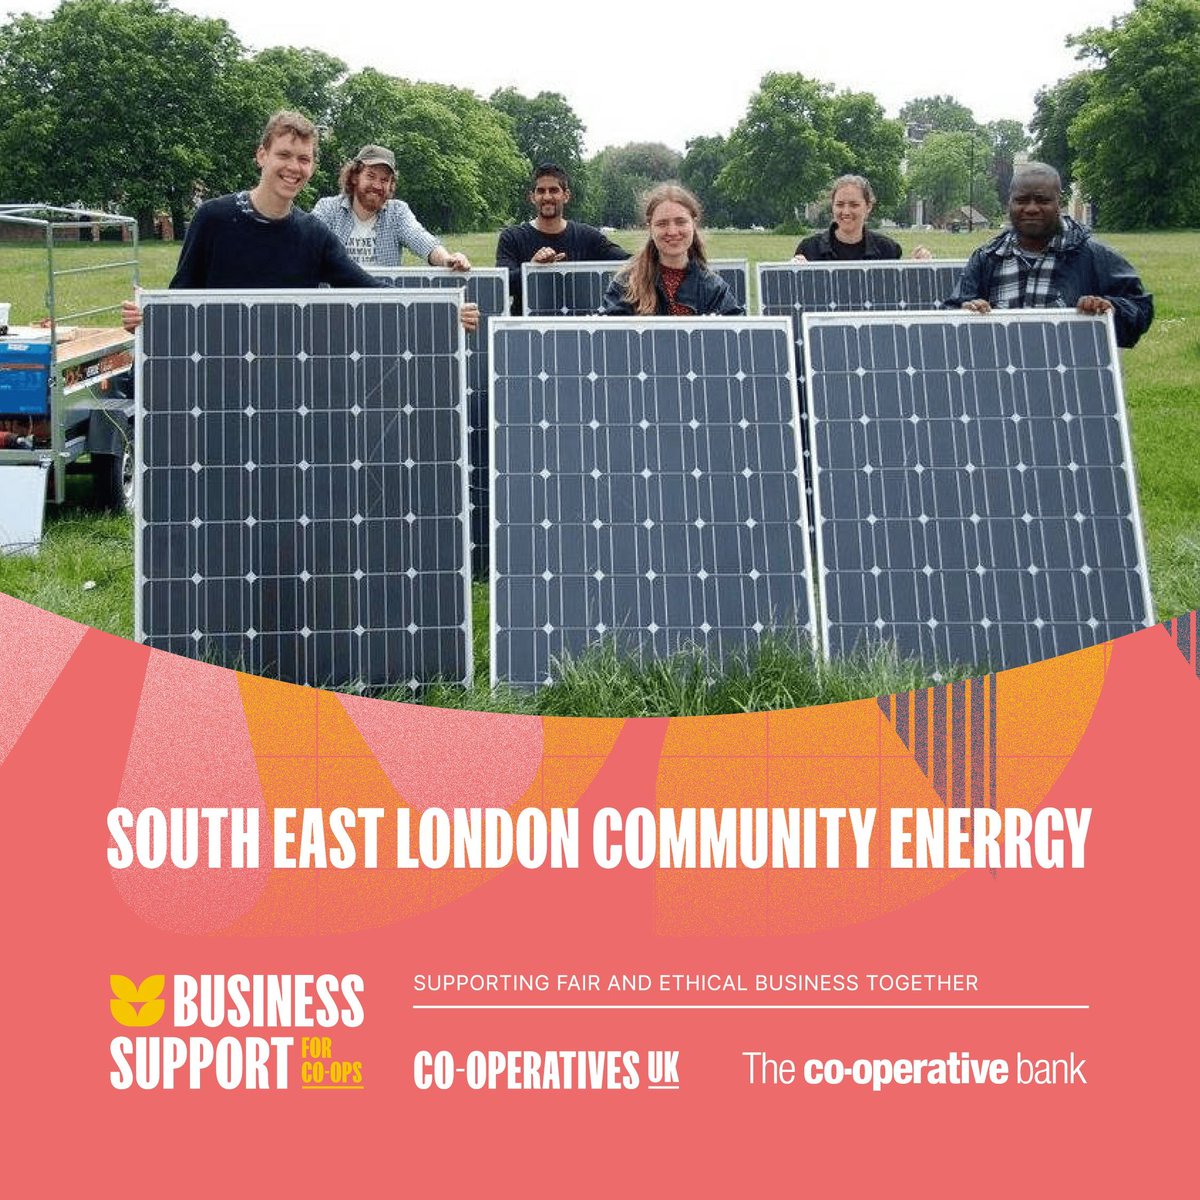 🌞 Discover #coops taking renewable energy from strength to strength! 👏 Thanks to our Business Support for Co-ops, @SELonCommEnergy got expert advice to help them operate more effectively in tackling climate change & fuel poverty. Read more 👉 buff.ly/3SF90fG 💚